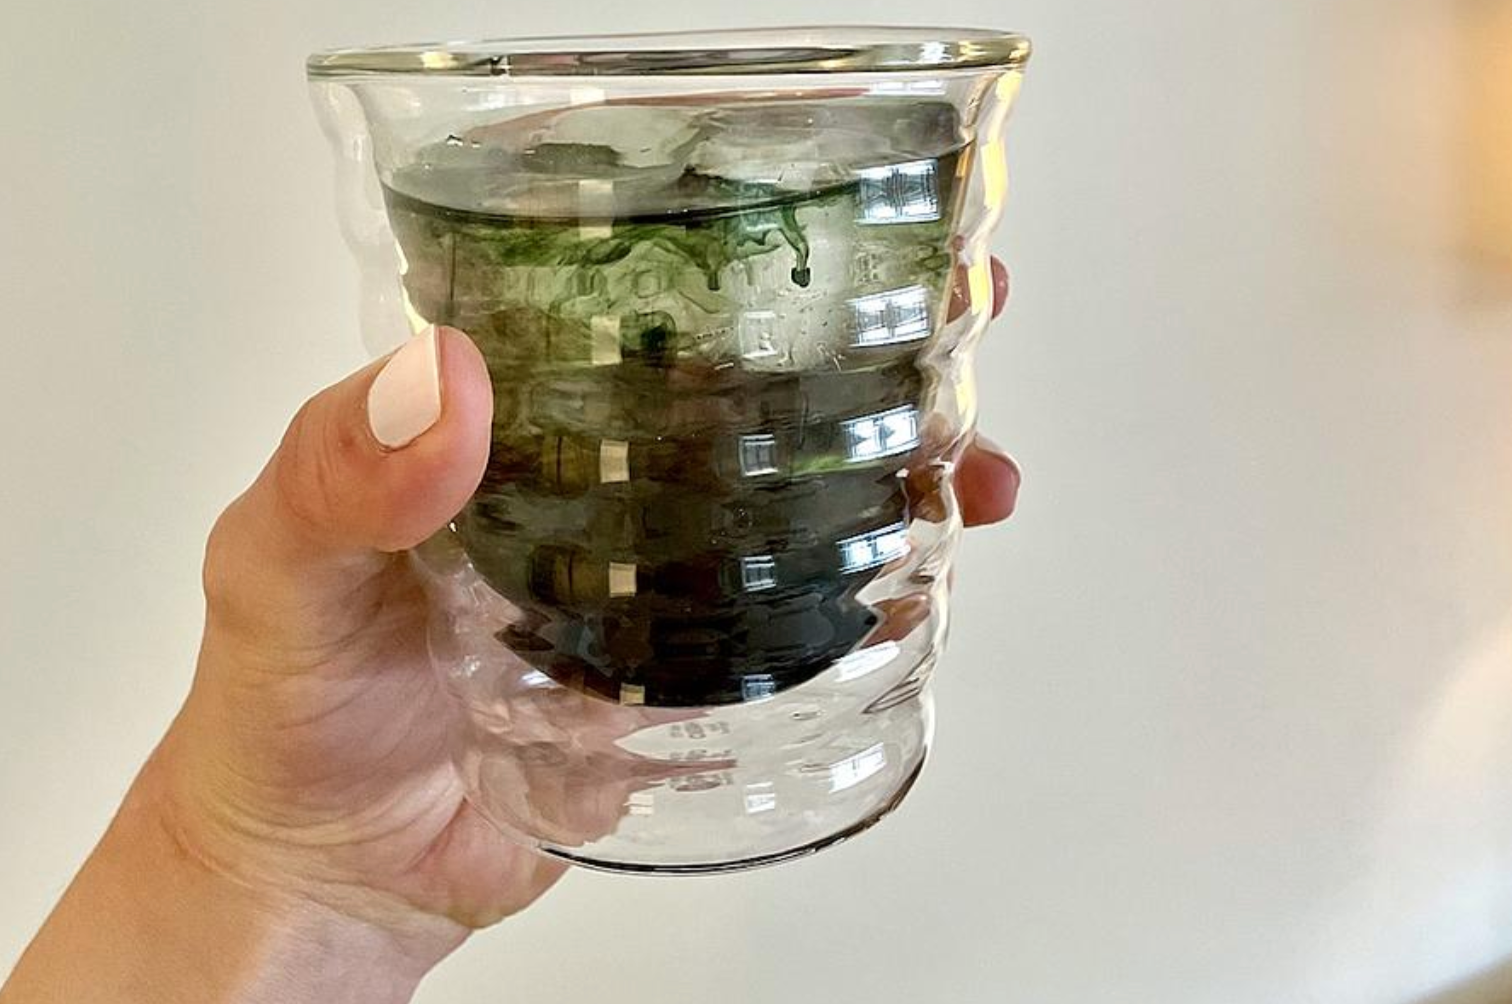 I Tried Drinking Chlorophyll Water For A Week And Here's What Happened by Gaby Verdolini